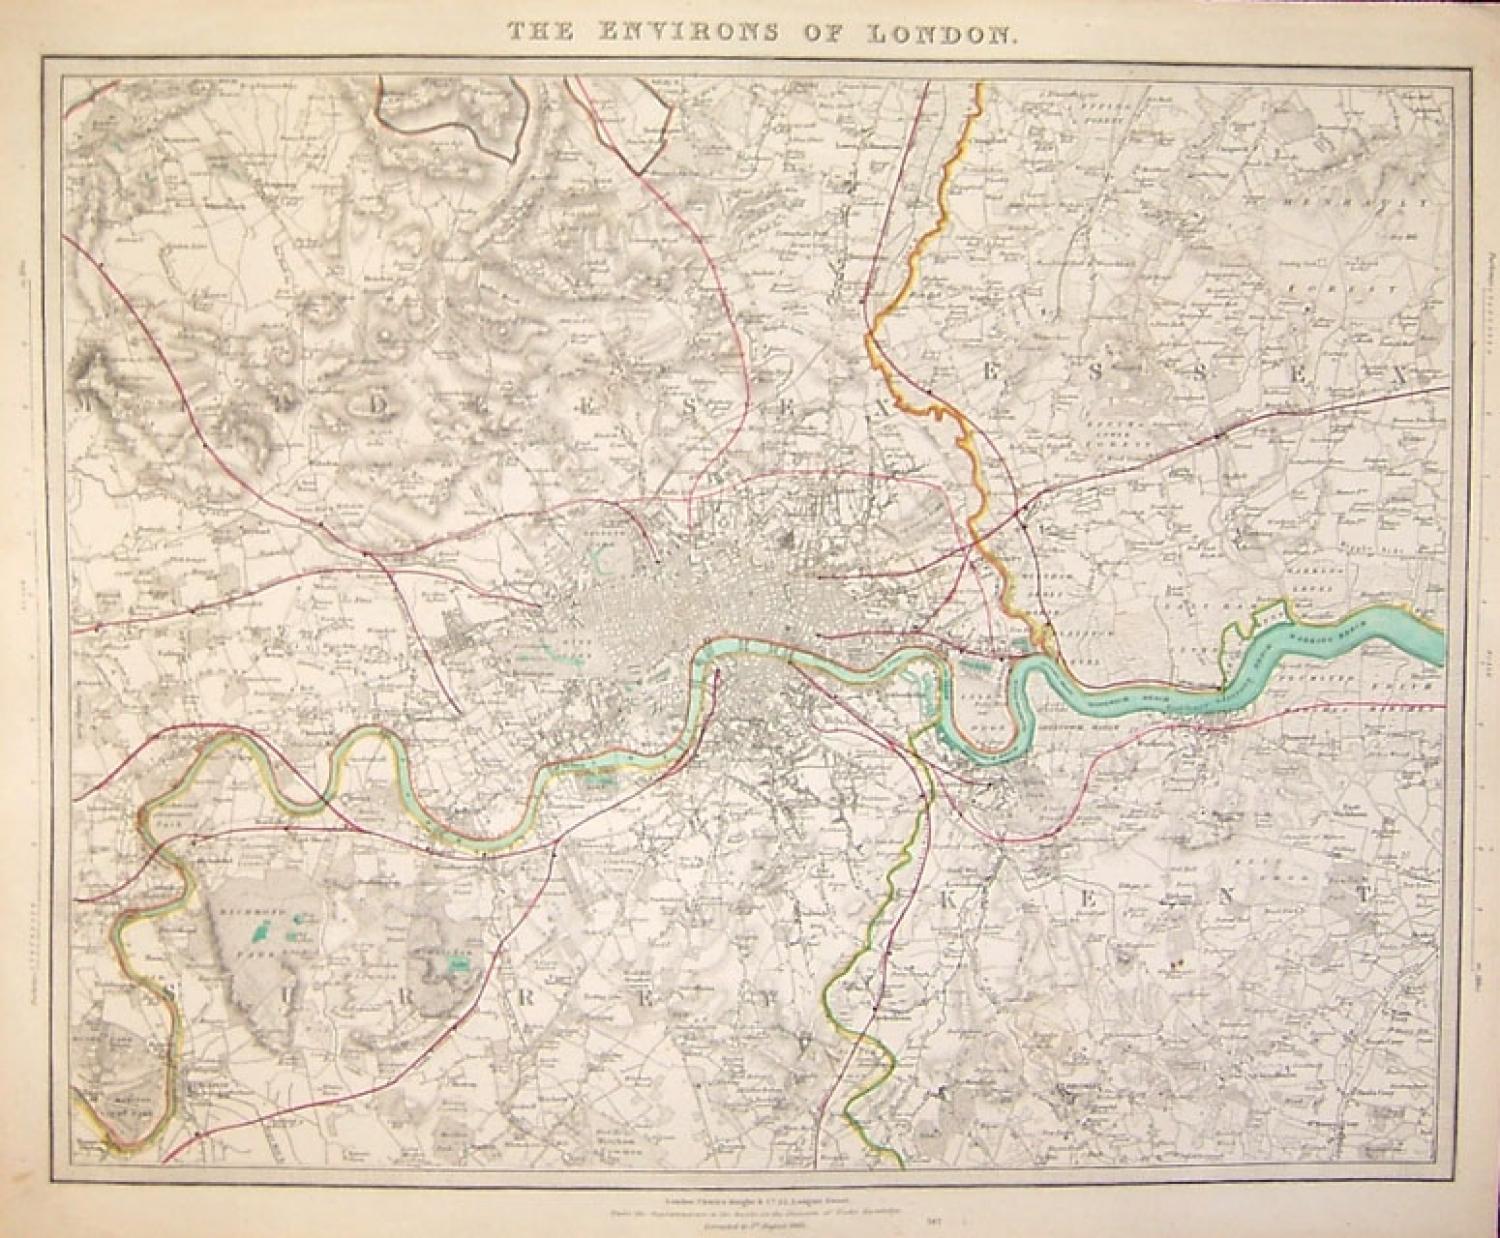 SOLD Environs of London